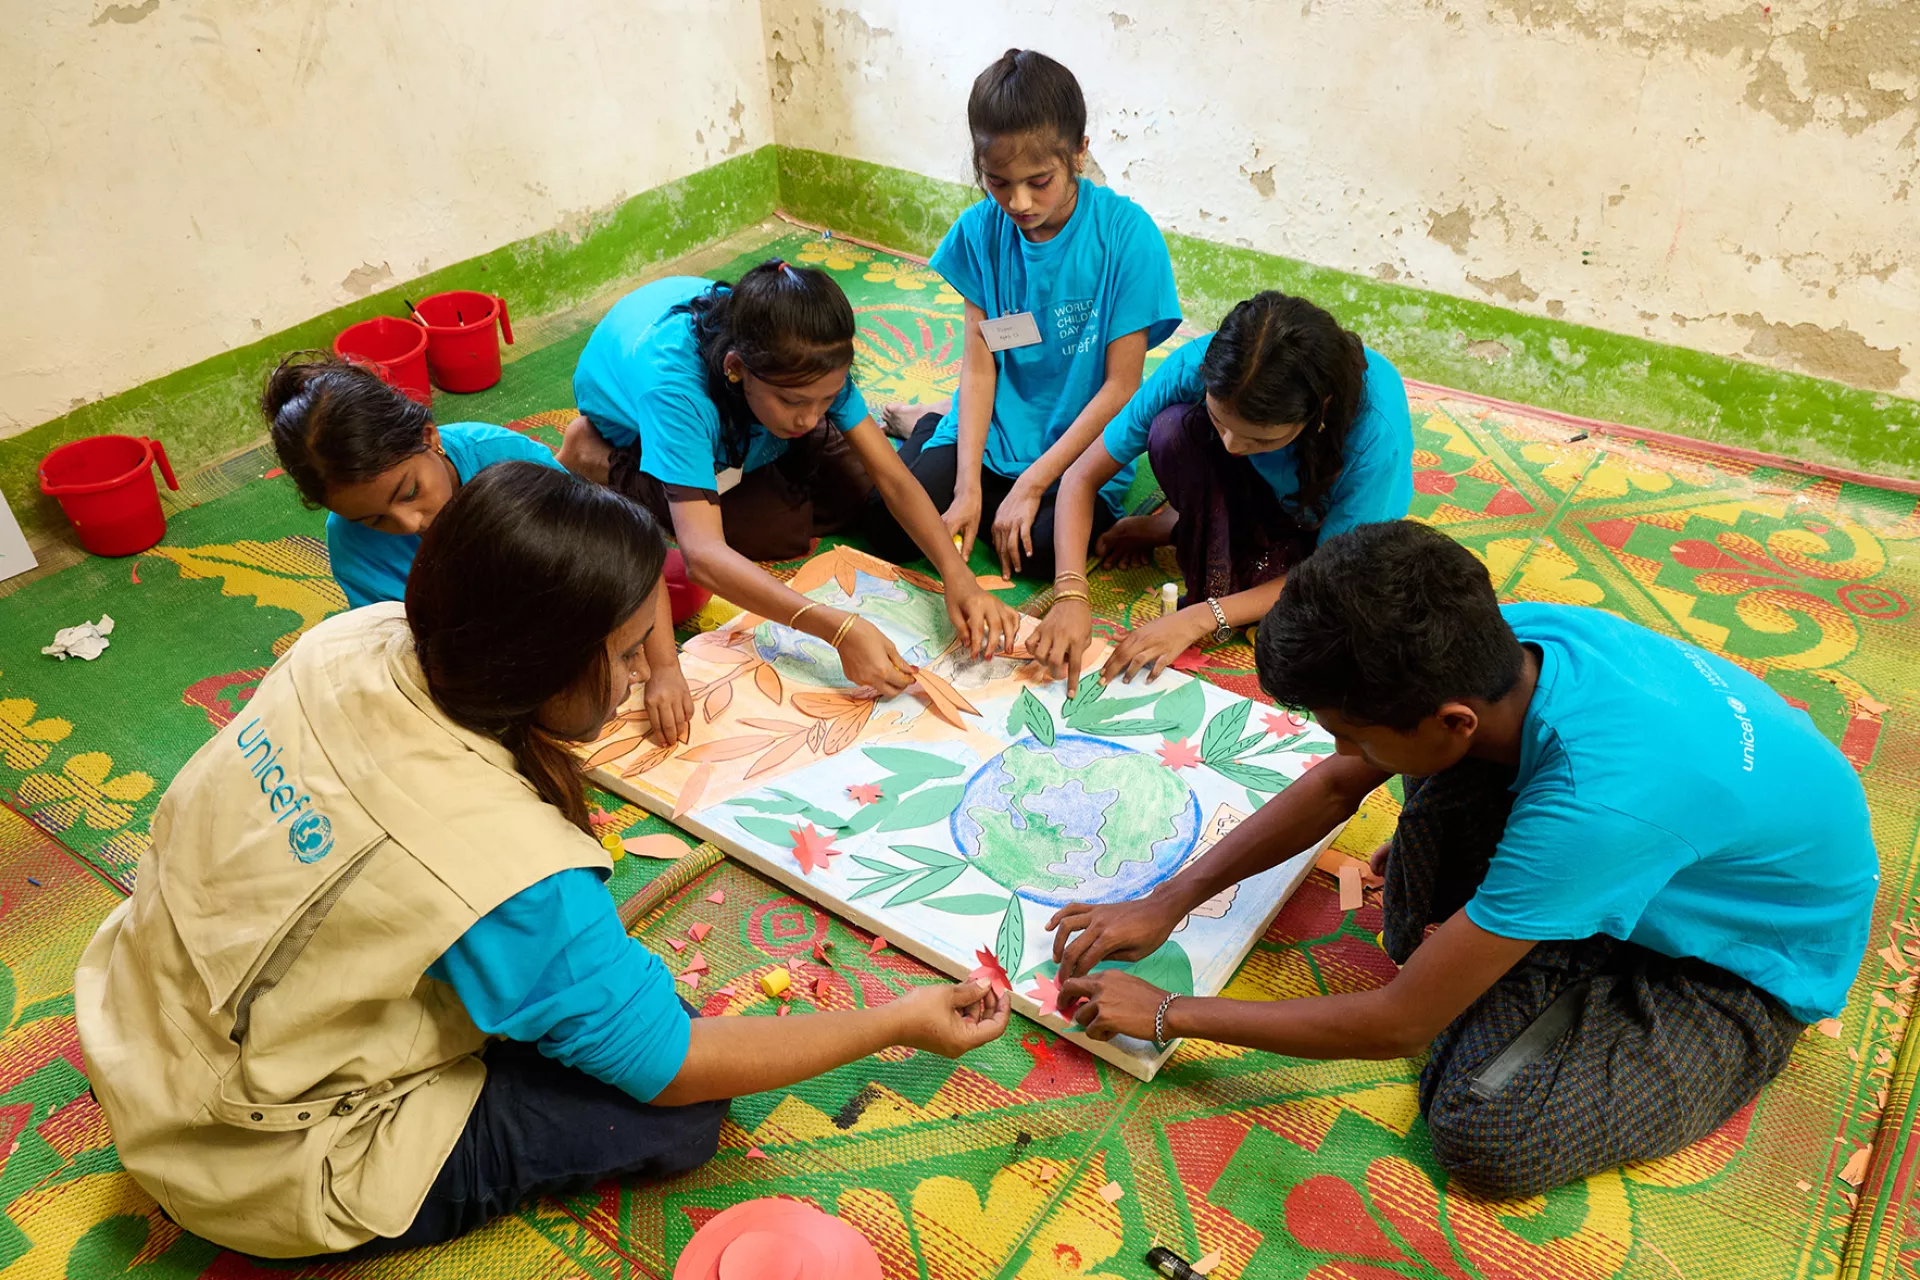 Children in Bangladesh work on an art project to raise awareness about climate change